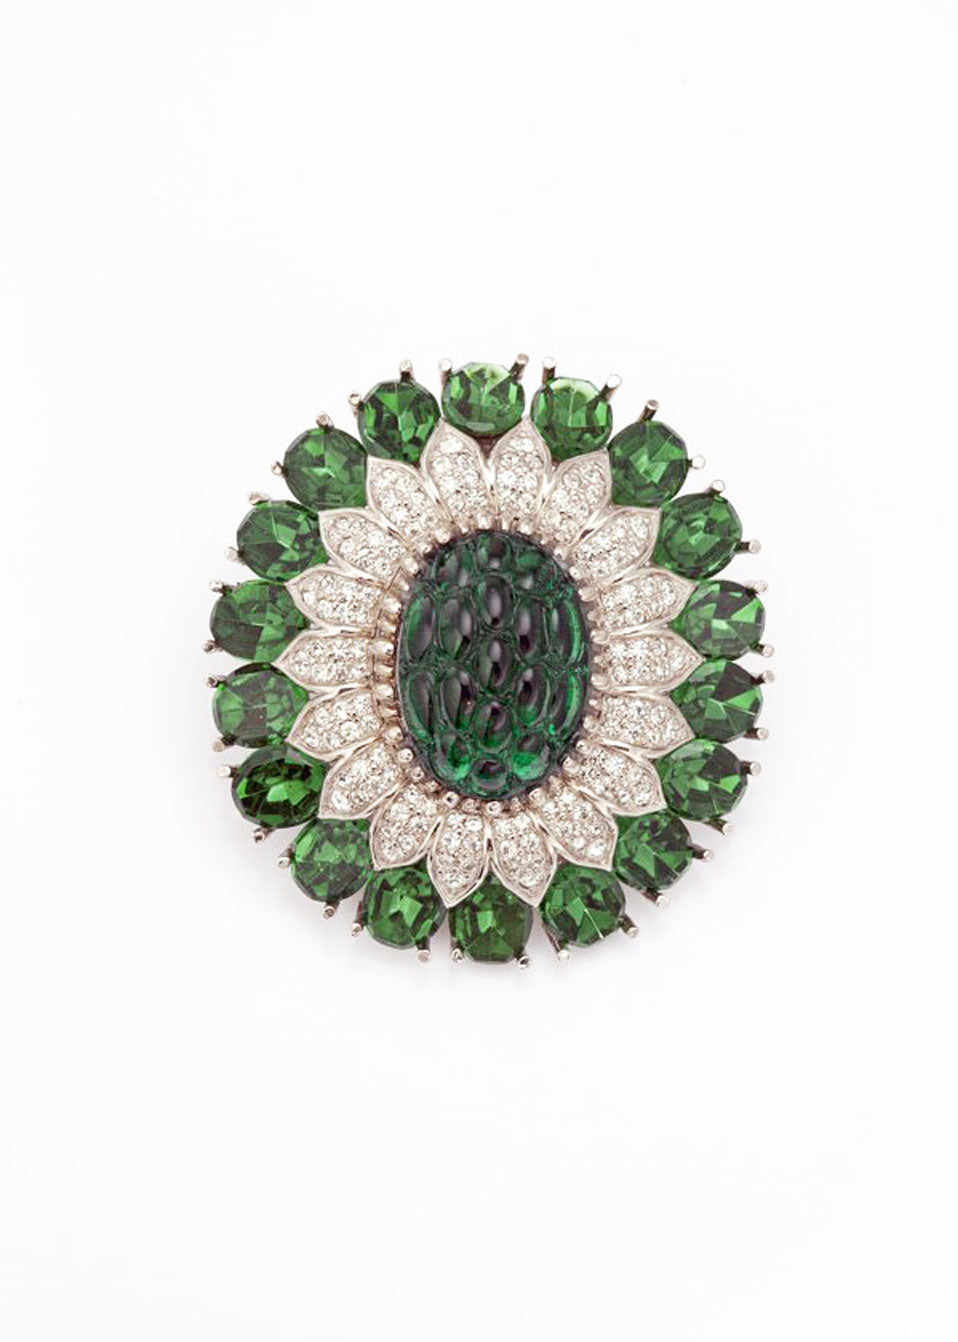 Large Tourmaline and Crystal Brooch